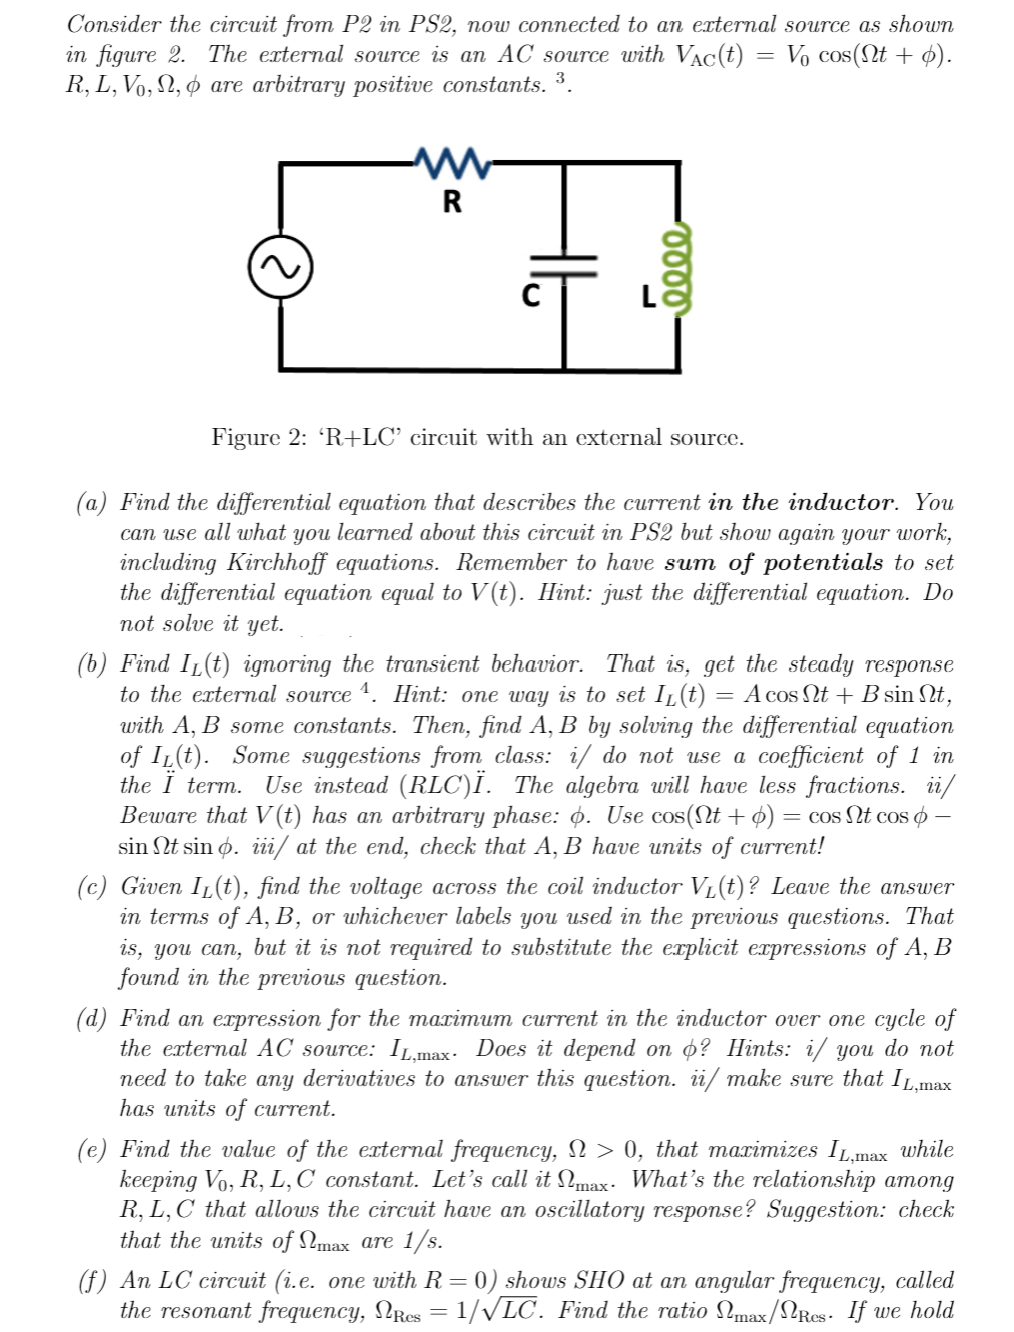 Consider the circuit from P2 in PS2, now connected to an external source as shown
in figure 2. The external source is an AC source with Vac(t) Vo cos(nt + p).
R, L, Vo, №, & are arbitrary positive constants. ³.
W
R
0000
Figure 2: 'R+LC' circuit with an external source.
=
(a) Find the differential equation that describes the current in the inductor. You
can use all what you learned about this circuit in PS2 but show again your work,
including Kirchhoff equations. Remember to have sum of potentials to set
the differential equation equal to V(t). Hint: just the differential equation. Do
not solve it yet.
(b) Find IL(t) ignoring the transient behavior. That is, get the steady response
to the external source ¹. Hint: one way is to set I₁(t) = A cos Nt + B sin Nt,
with A, B some constants. Then, find A, B by solving the differential equation
of IL(t). Some suggestions from class: i/ do not use a coefficient of 1 in
the Ï term. Use instead (RLC)Ï. The algebra will have less fractions. ii/
Beware that V (t) has an arbitrary phase: Ġ. Use cos(Nt + p) : = cos Nt cos -
sin Nt sin p. iii/ at the end, check that A, B have units of current!
(c) Given I₁(t), find the voltage across the coil inductor V₁(t)? Leave the answer
in terms of A, B, or whichever labels you used in the previous questions. That
is, you can, but it is not required to substitute the explicit expressions of A, B
found in the previous question.
(d) Find an expression for the maximum current in the inductor over one cycle of
the external AC source: IL,max. Does it depend on o? Hints: i/ you do not
need to take any derivatives to answer this question. ii/ make sure that IL,max
has units of current.
(e) Find the value of the external frequency, N > 0, that maximizes IL,max while
keeping Vo, R, L, C constant. Let's call it max. What's the relationship among
R, L, C that allows the circuit have an oscillatory response? Suggestion: check
that the units of max are 1/s.
(f) An LC circuit (i.e. one with R = 0) shows SHO at an angular frequency, called
the resonant frequency, NRcs = 1/√LC. Find the ratio Nmax/Res. If we hold